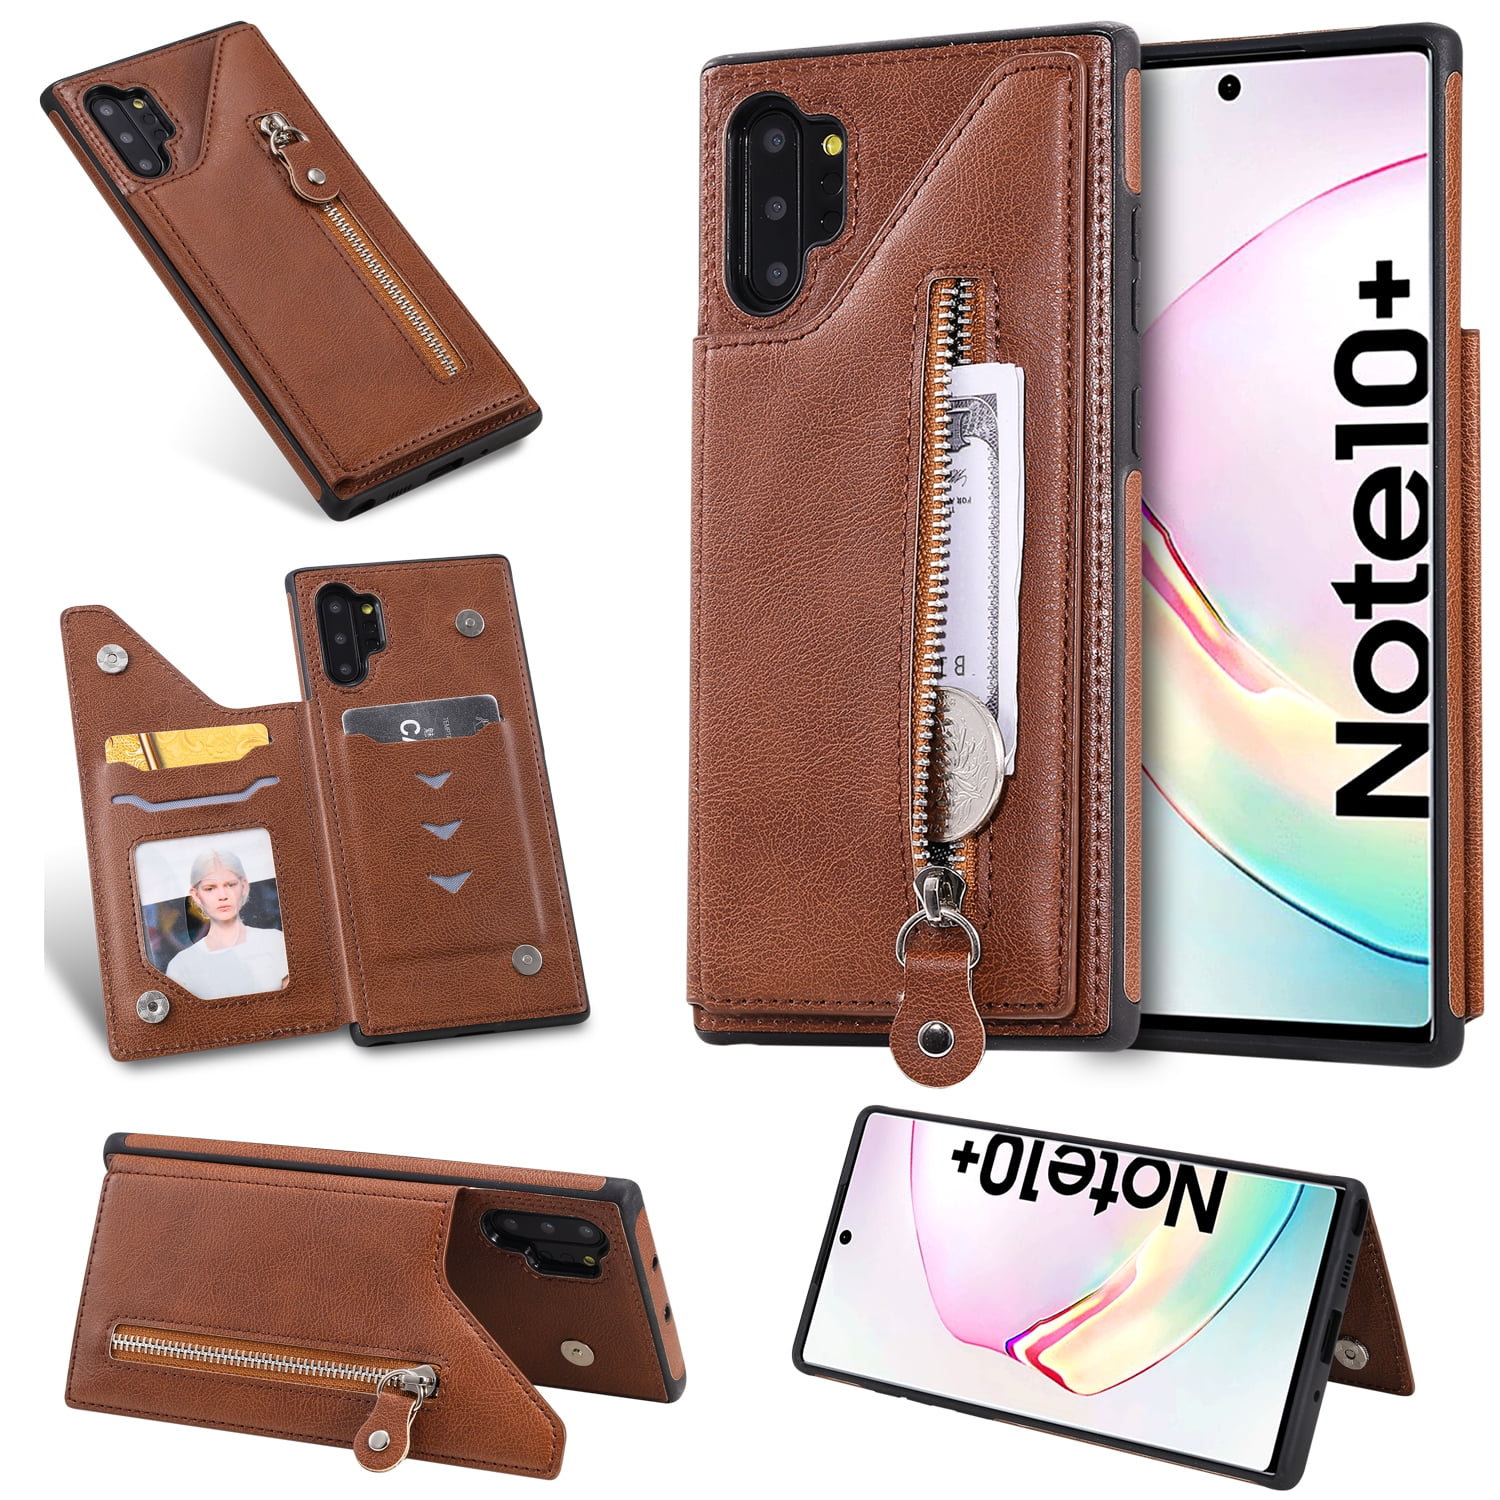 Card Holders Kickstand Luxury Black Wallet Cover for Samsung Galaxy Note 10 Plus Leather Flip Case Fit for Samsung Galaxy Note 10 Plus